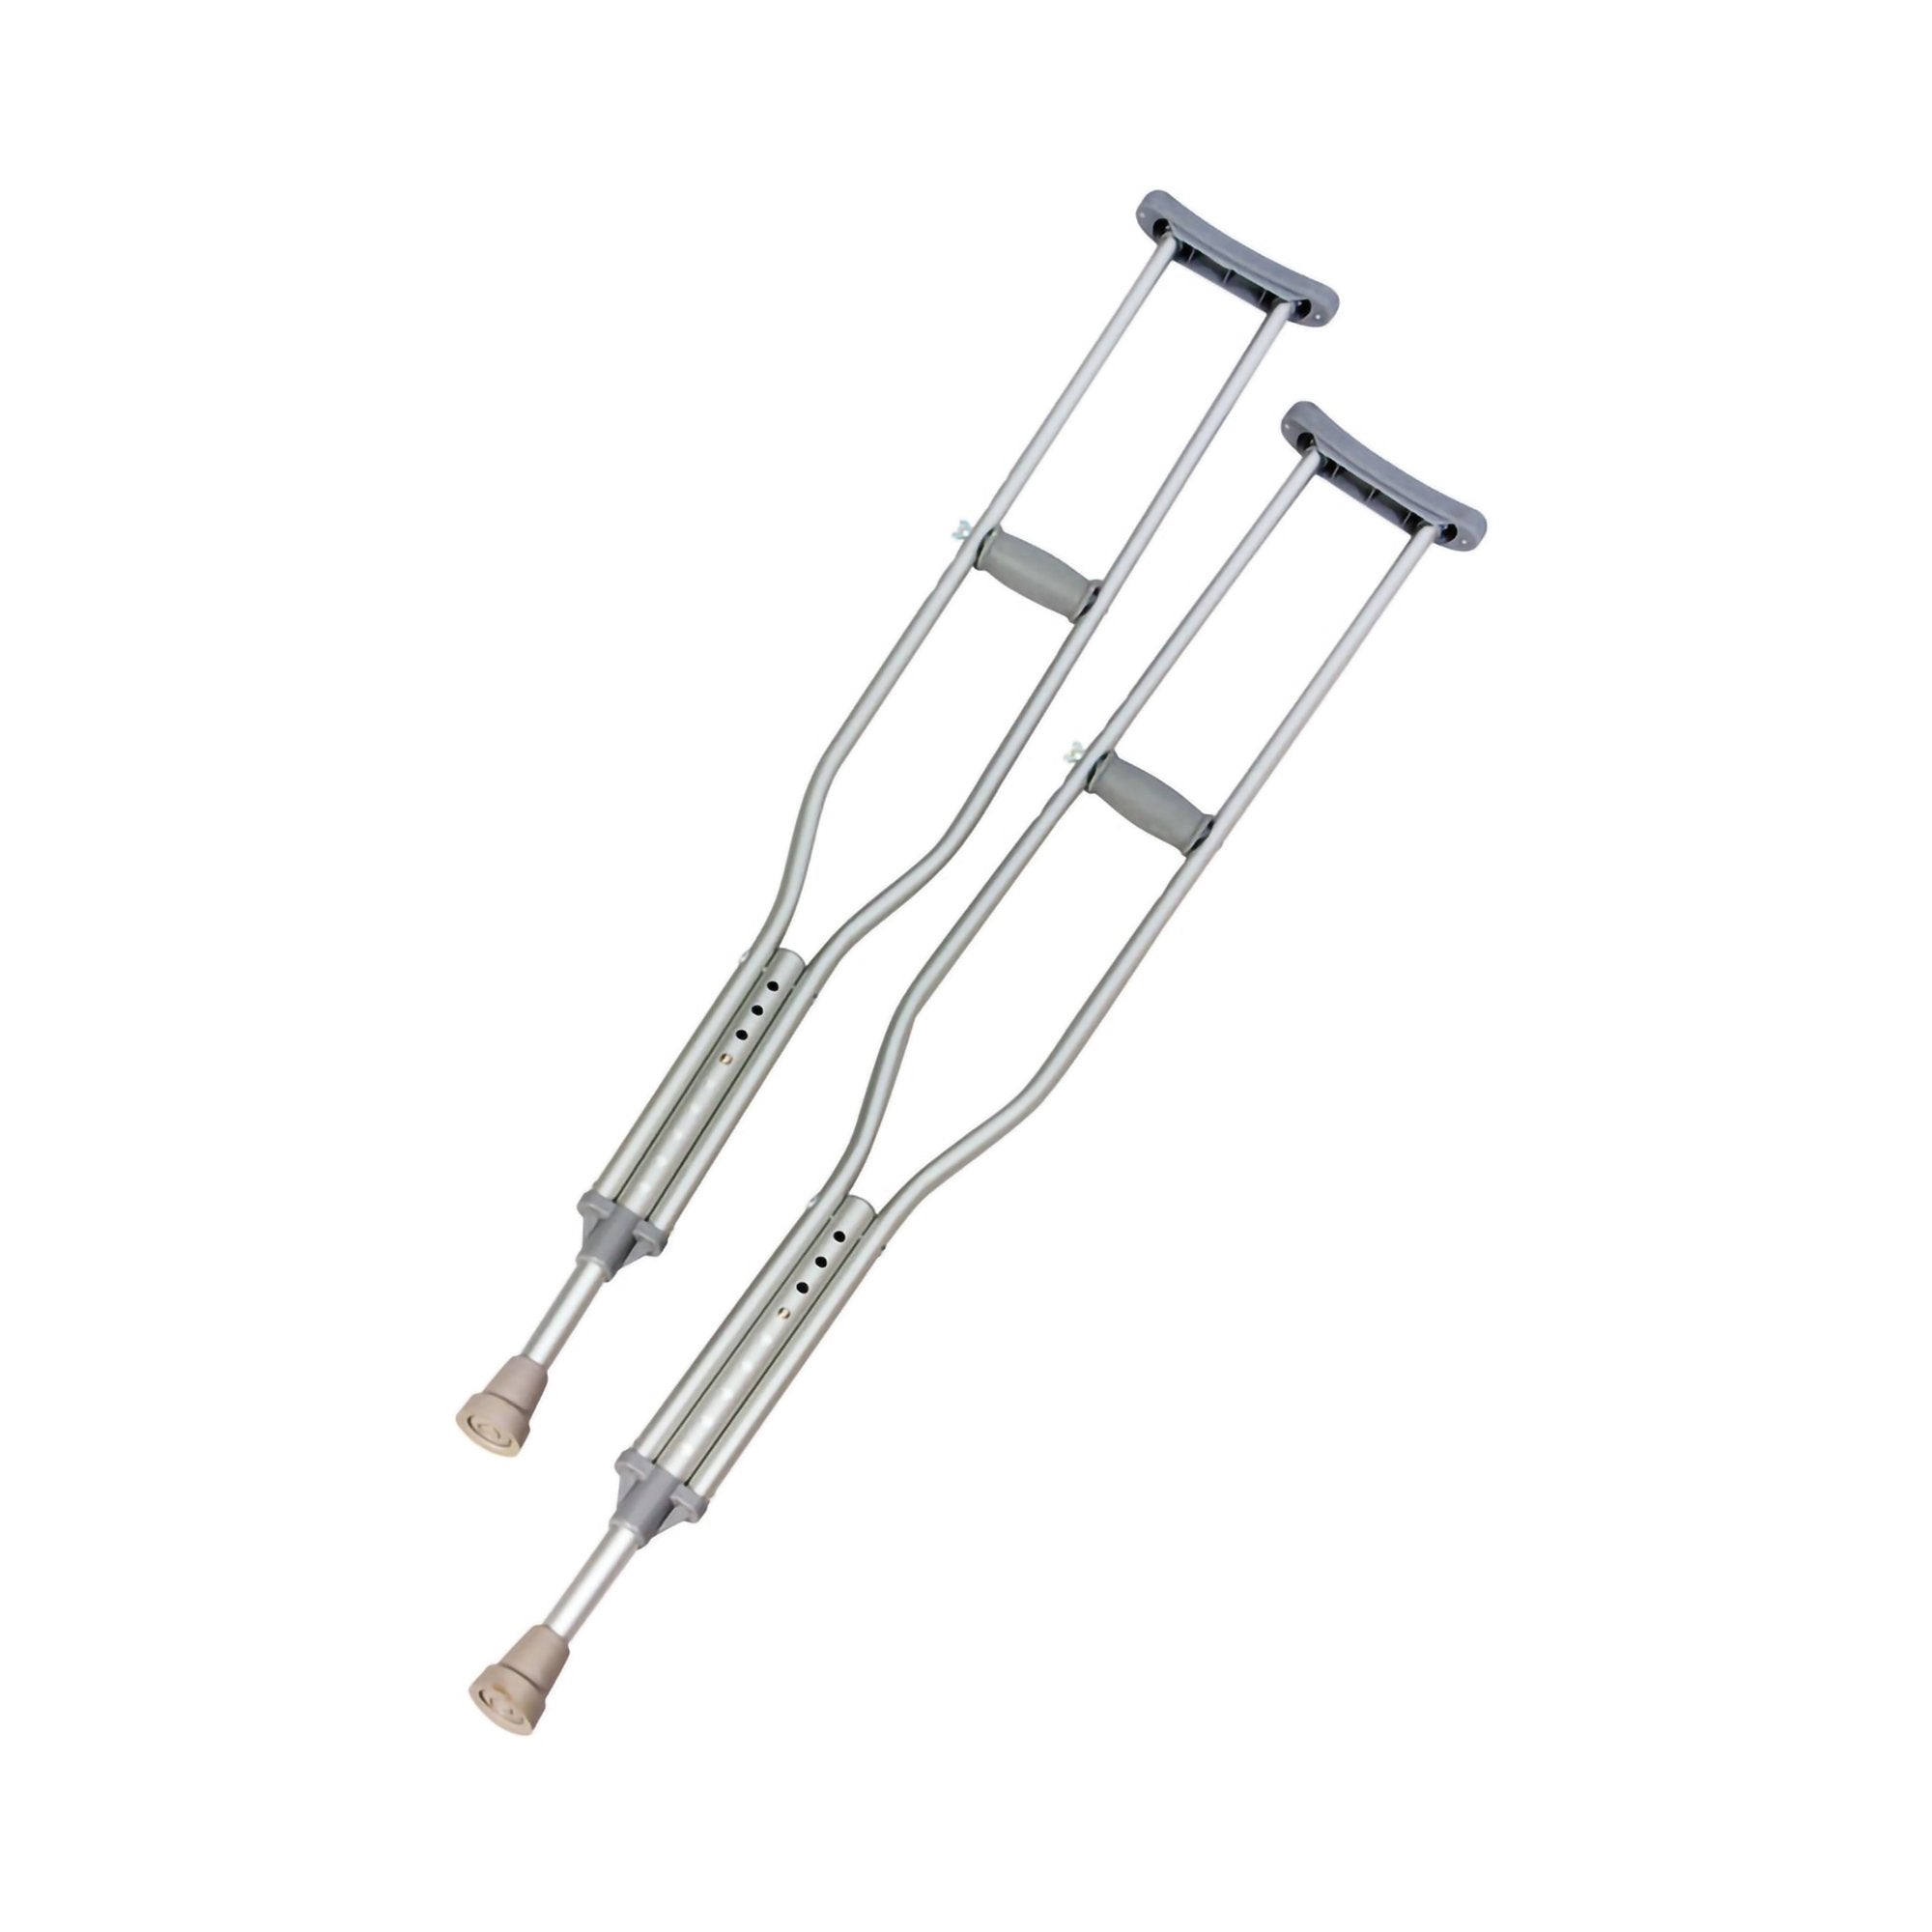 Underarm Crutches PremierPro™ Aluminum Frame Adult 300 lbs. Weight Capacity 45 to 53 Inch Crutch Height Push Button Adjustment